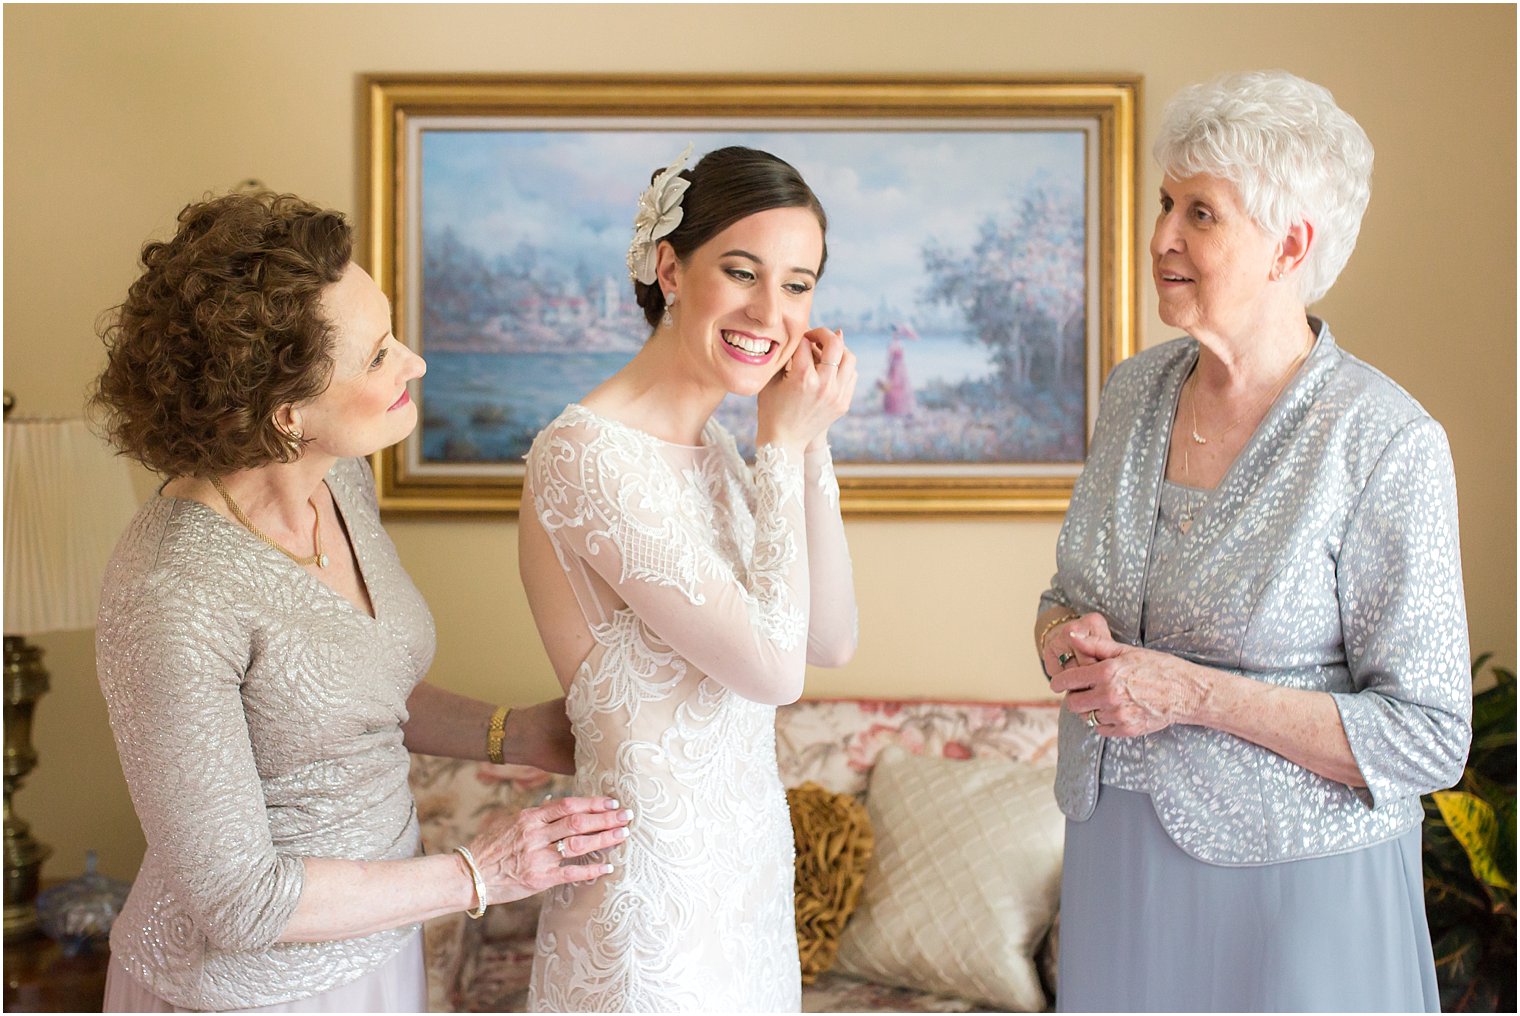 Bride getting ready with mother and grandmother